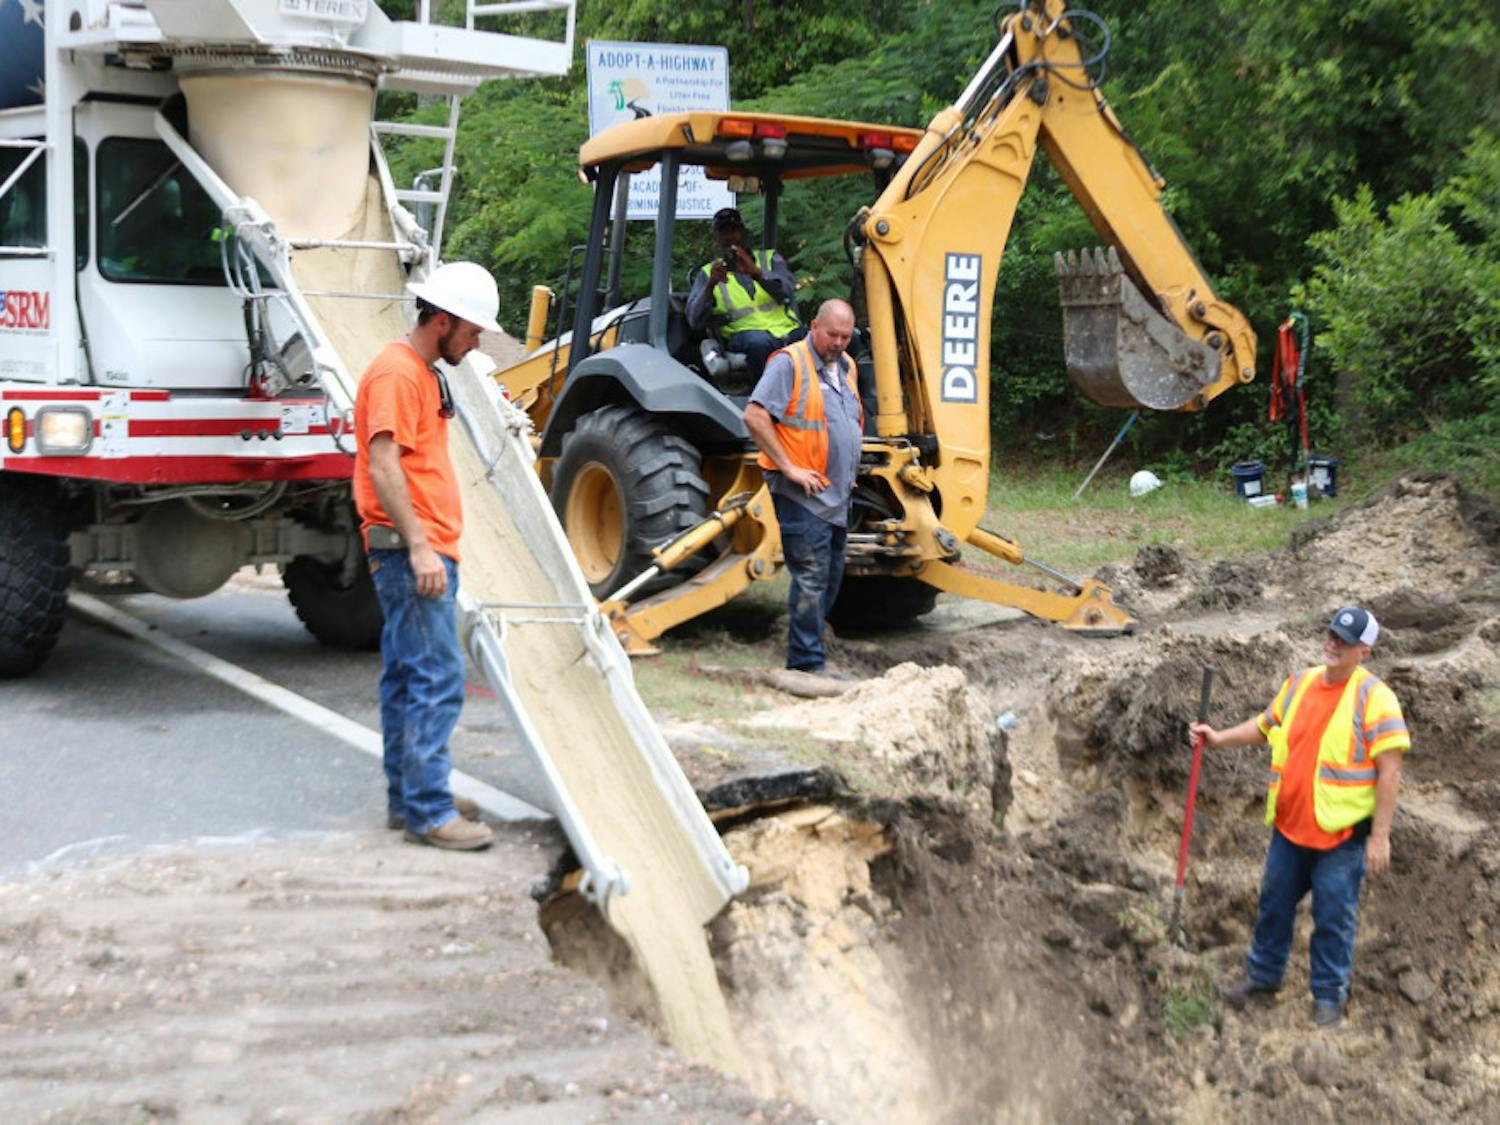 Construction workers from Newberry utilities pour concrete to fill a 20-foot deep sinkhole that opened on West Newberry Road on Wednesday morning.